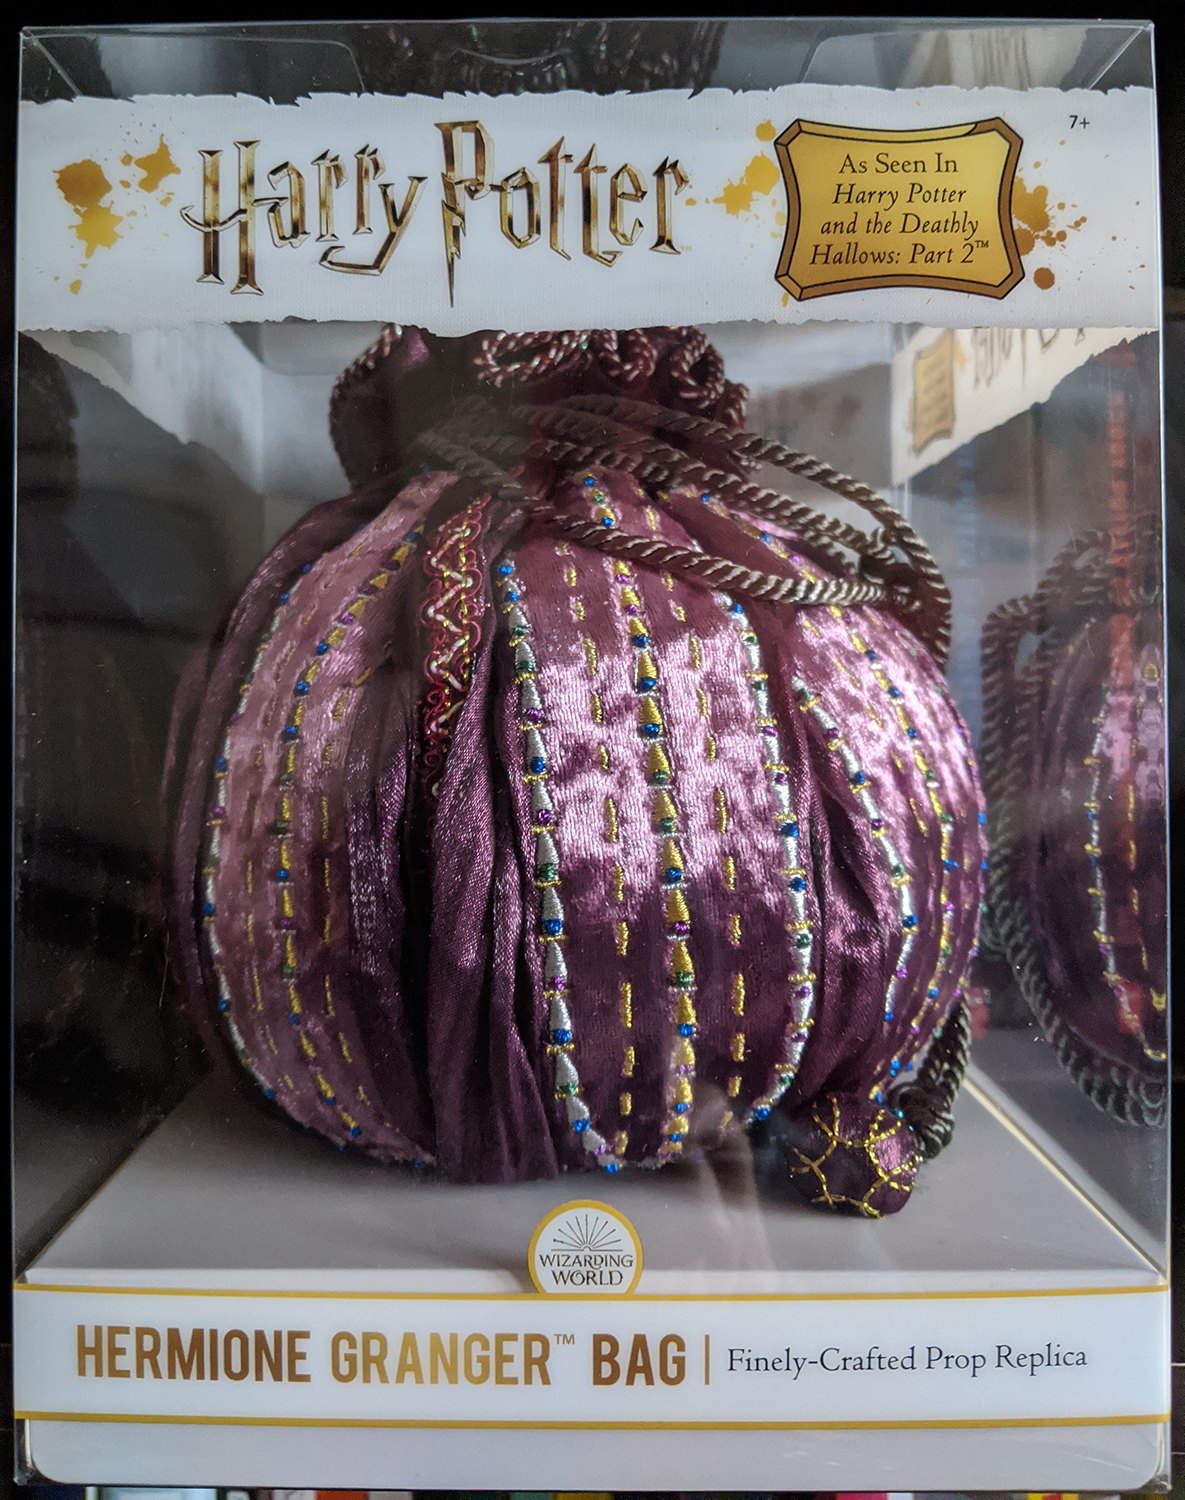 Hermione’s bag packaging, front